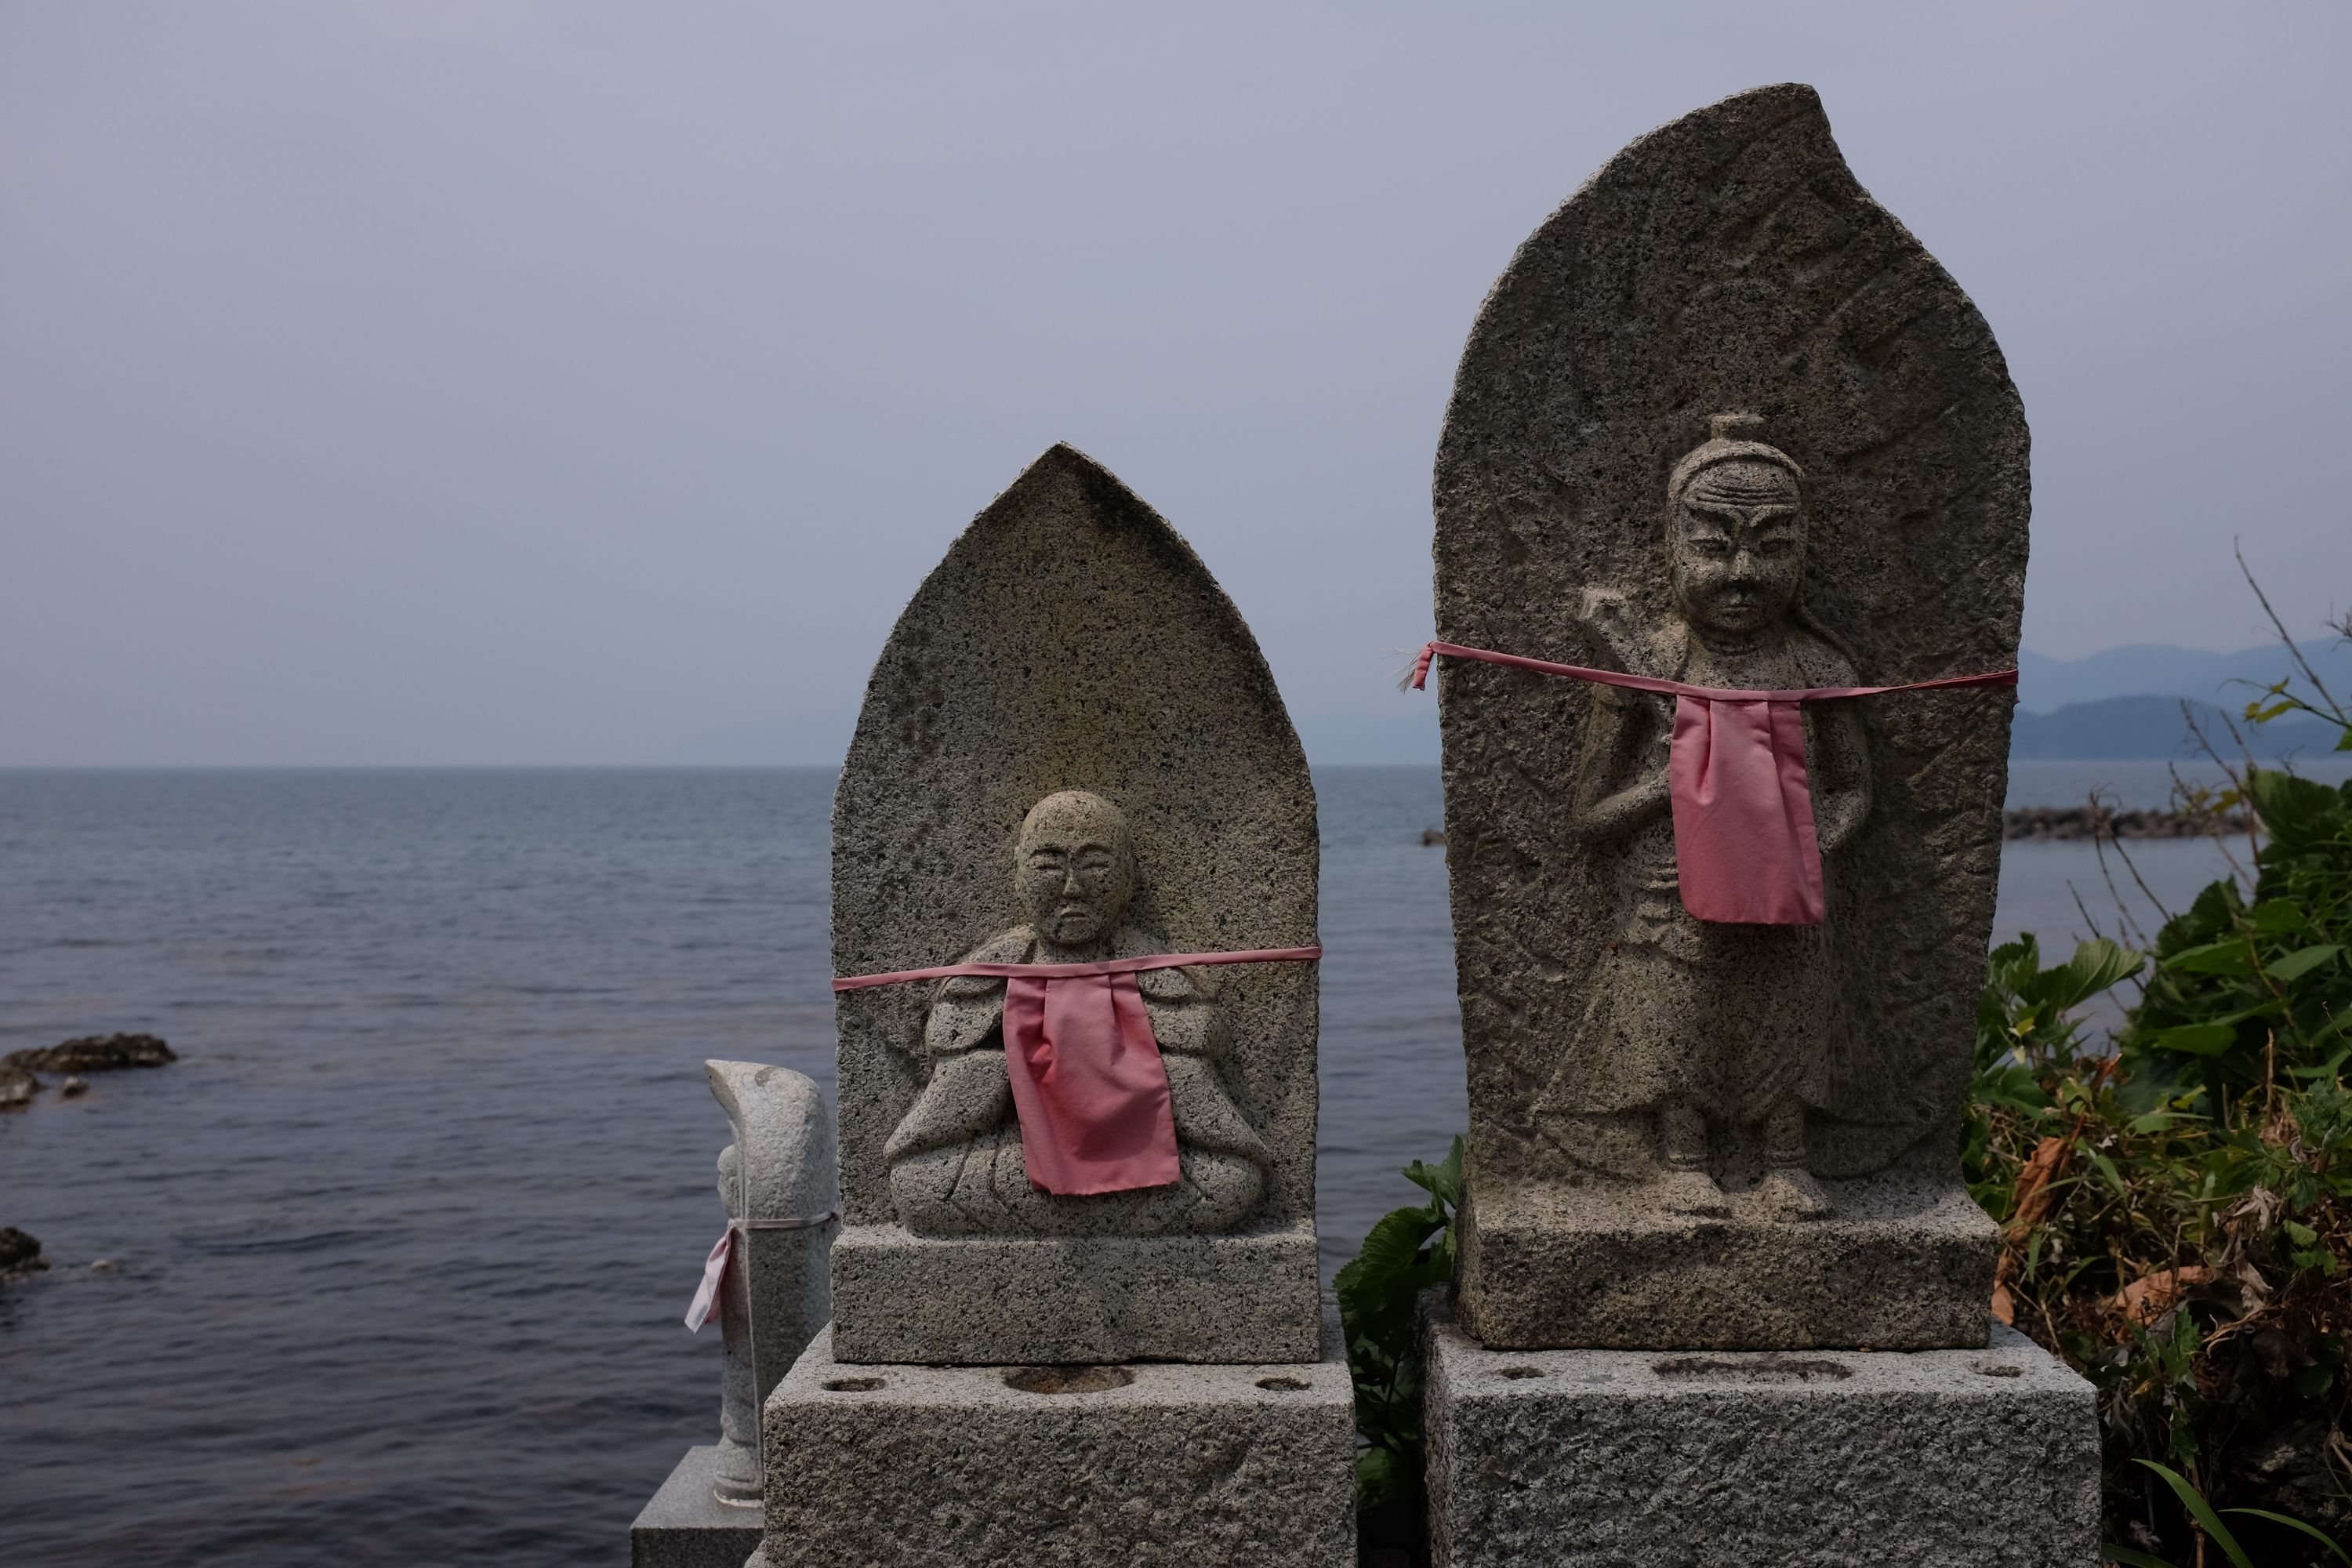 Three small Buddhist statues, wearing red aprons, stand on the shore of the Sea of Japan.